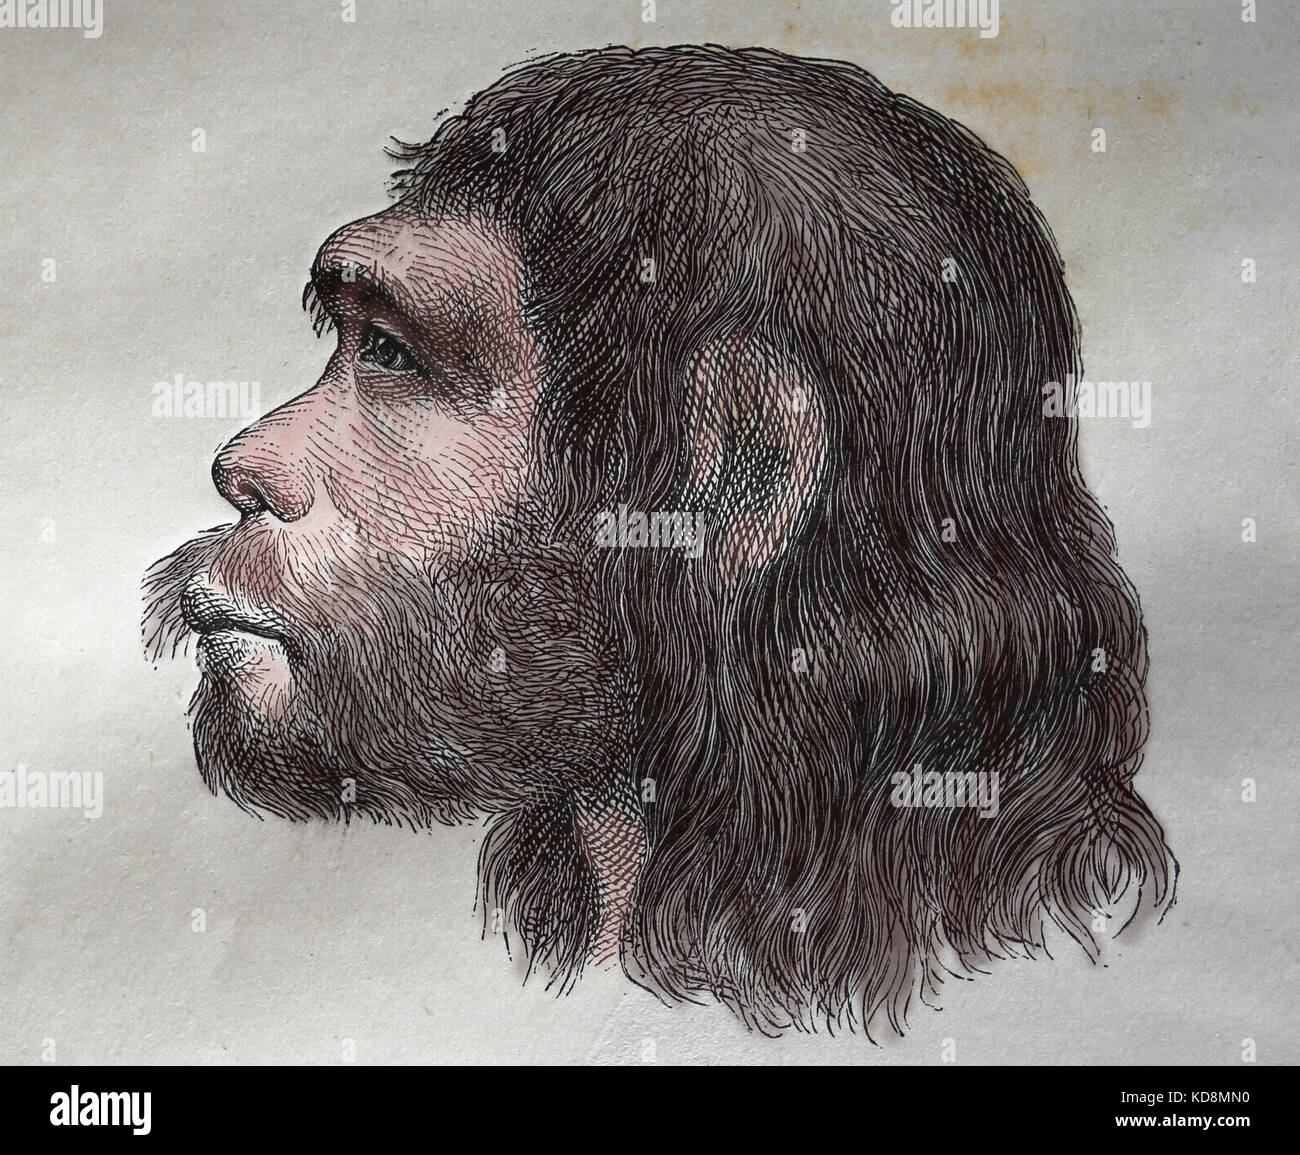 Neanderthal. Archaic humans in the genus Homo. Reconstruction. Engraving, 1883. Stock Photo